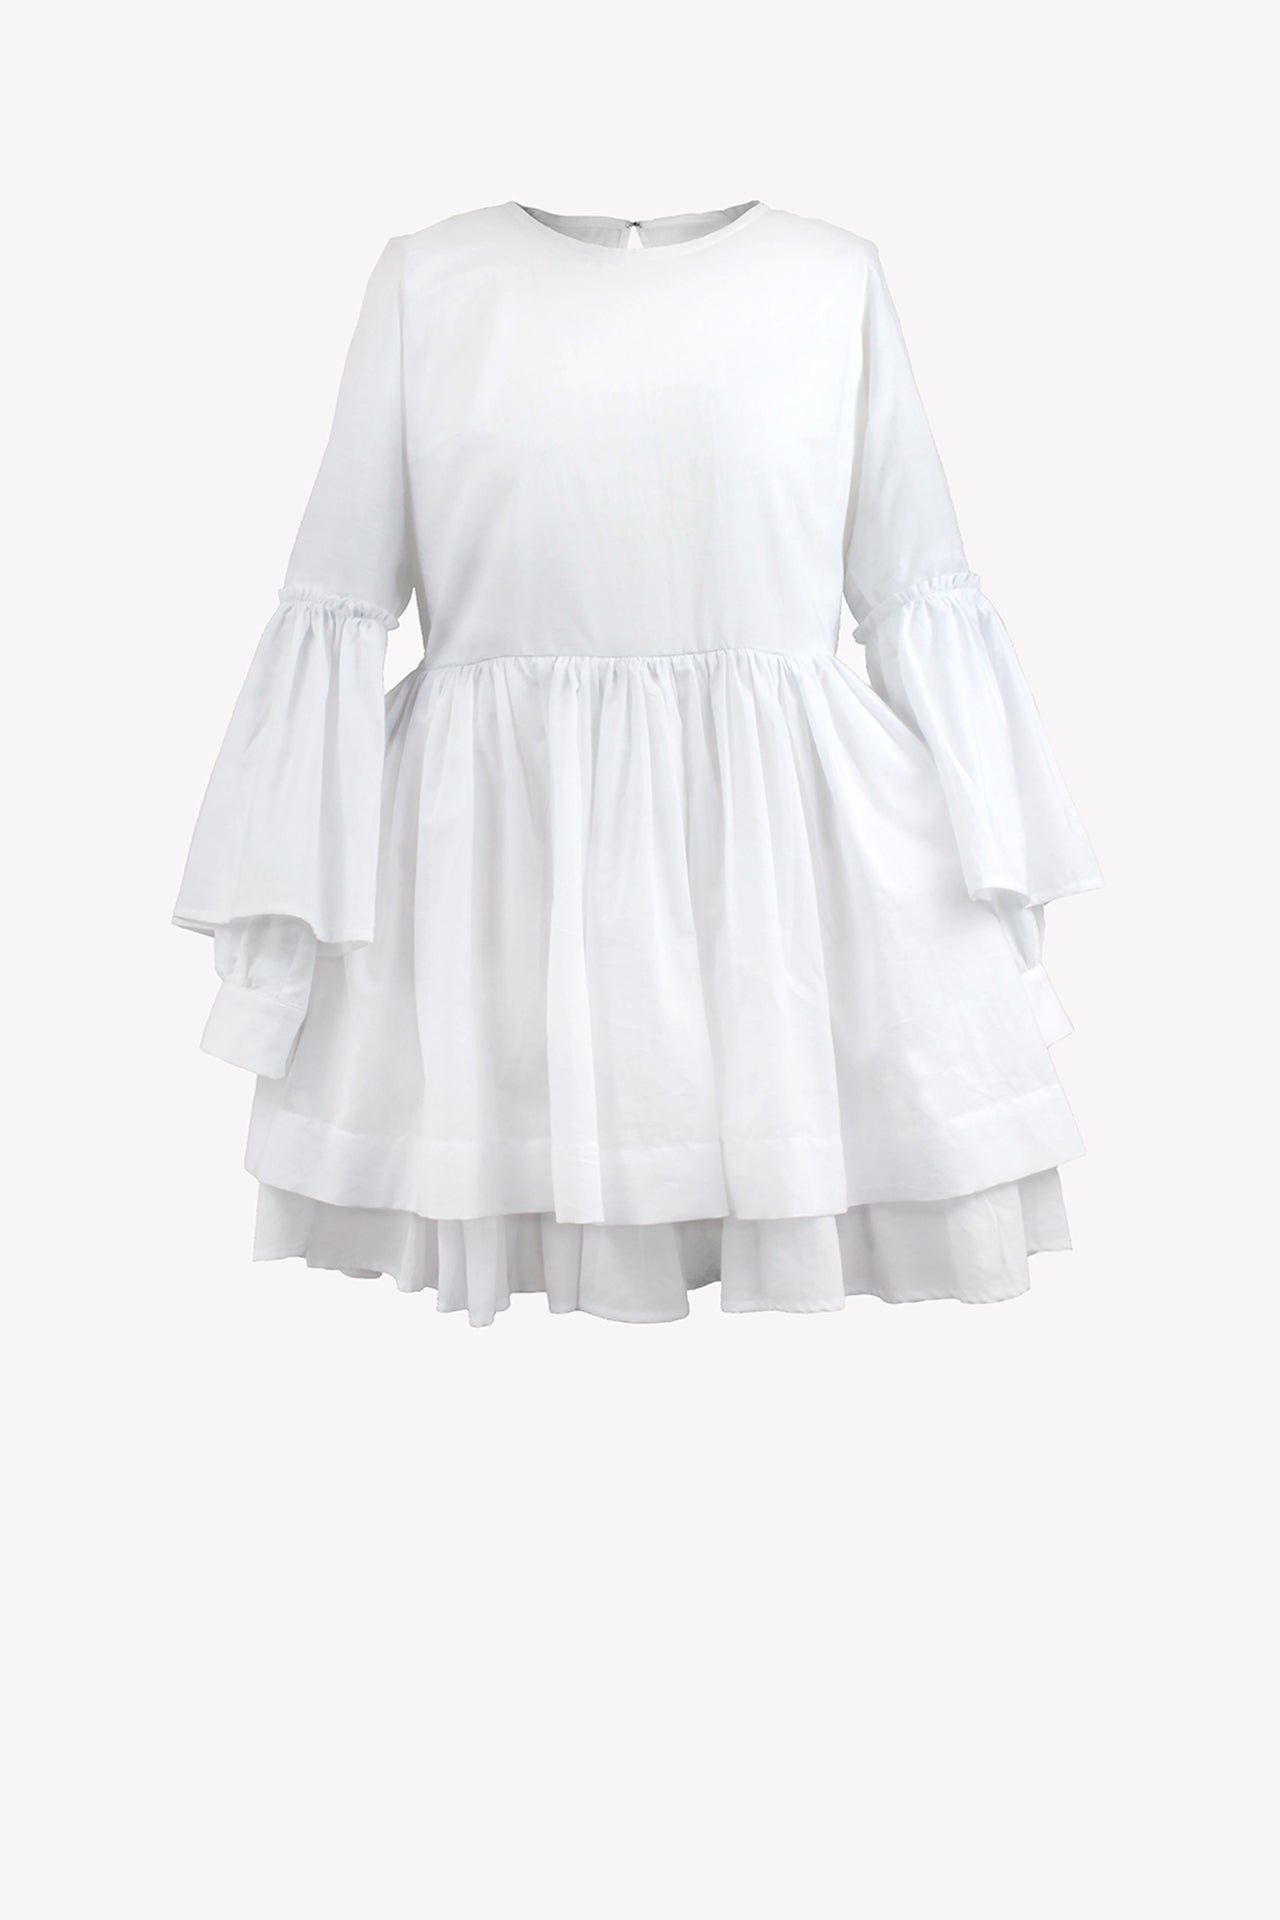 Cotton lolita dress with gathering on sleeves and open back